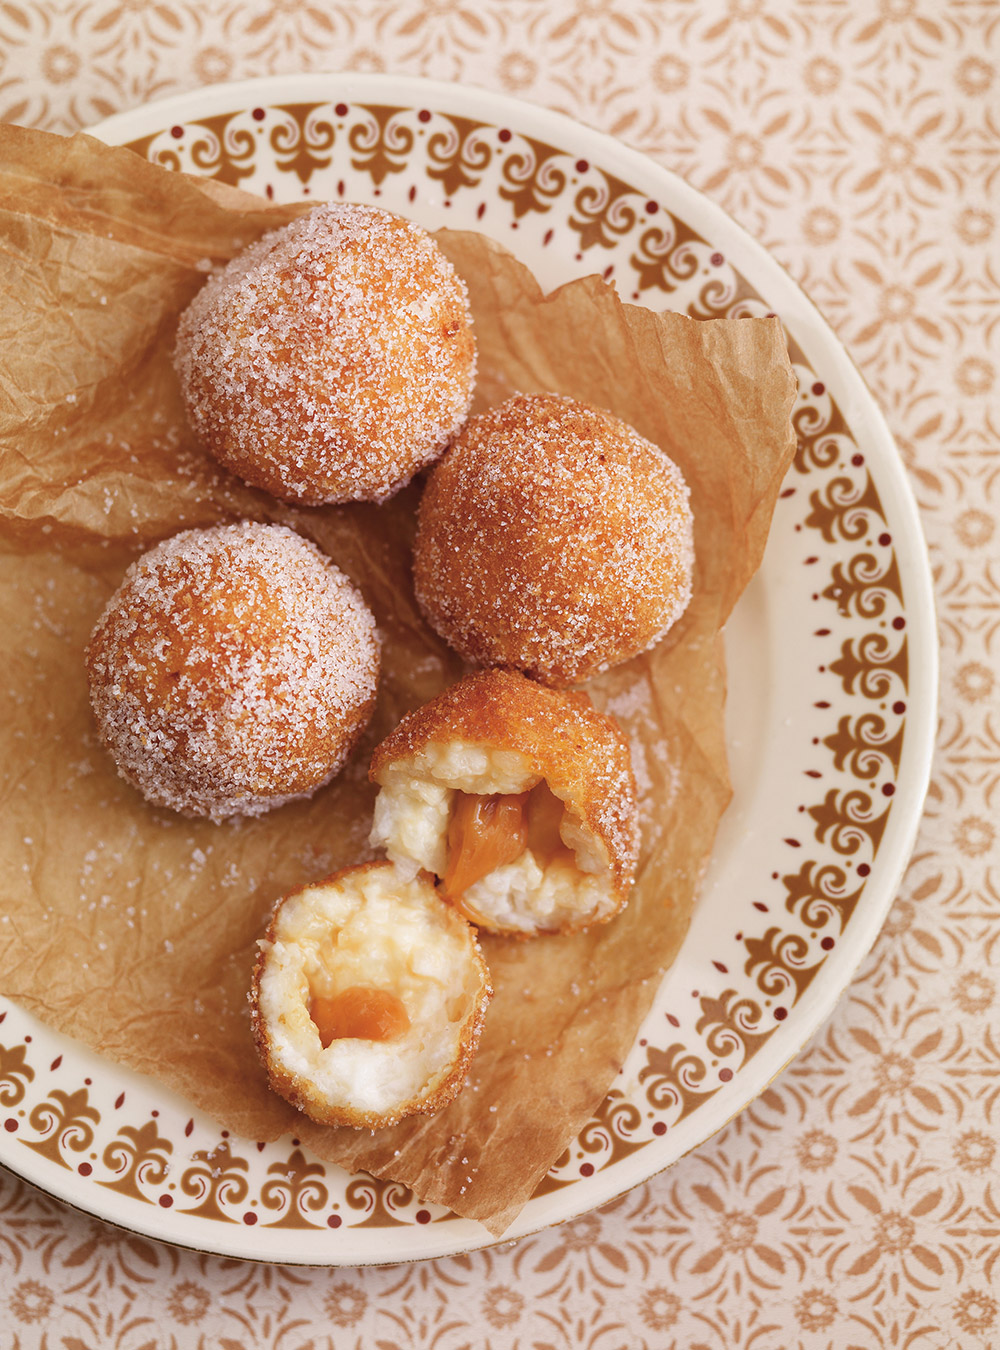 Fried Rice Pudding Balls with Caramel